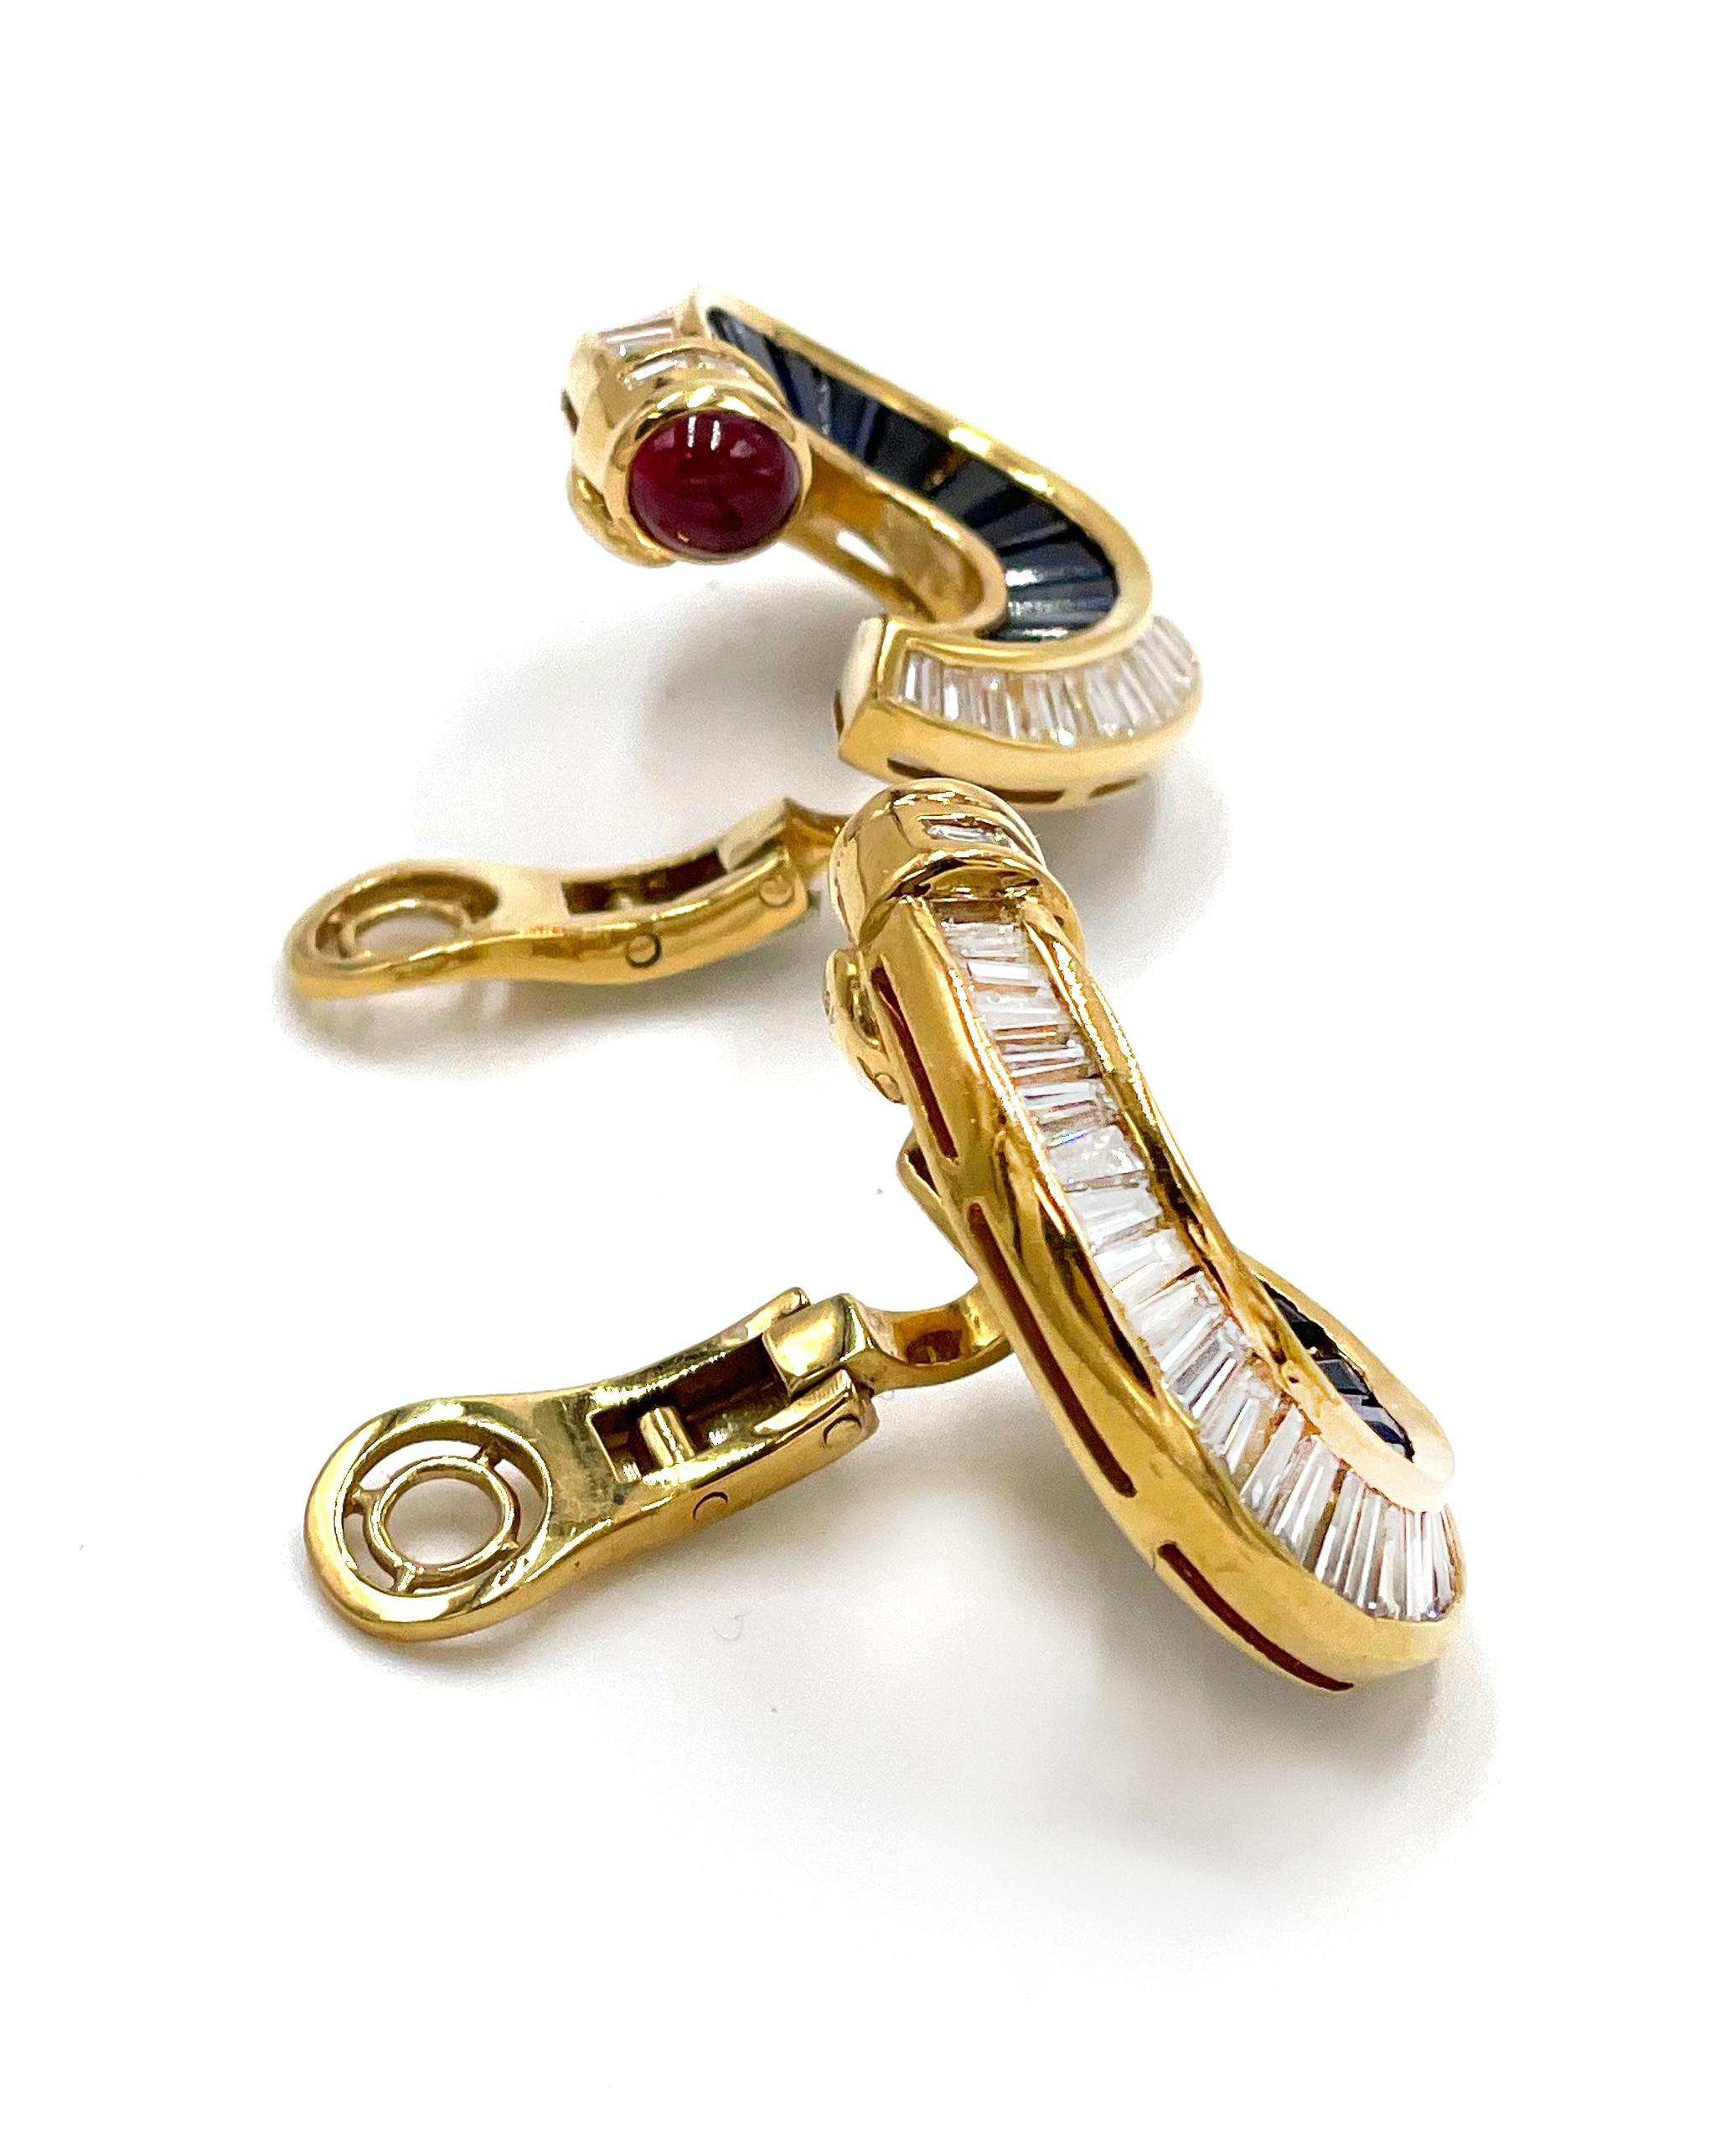 Preowned pair of 18K yellow gold ruby, sapphire and diamond earrings. Each showstopping earring is furnished with onebezel set oval cabochon cut ruby averaging 5.3x4.5mm. The rubies are deep pinkish red color, 5 tone, 5
saturation, VS clarity in a